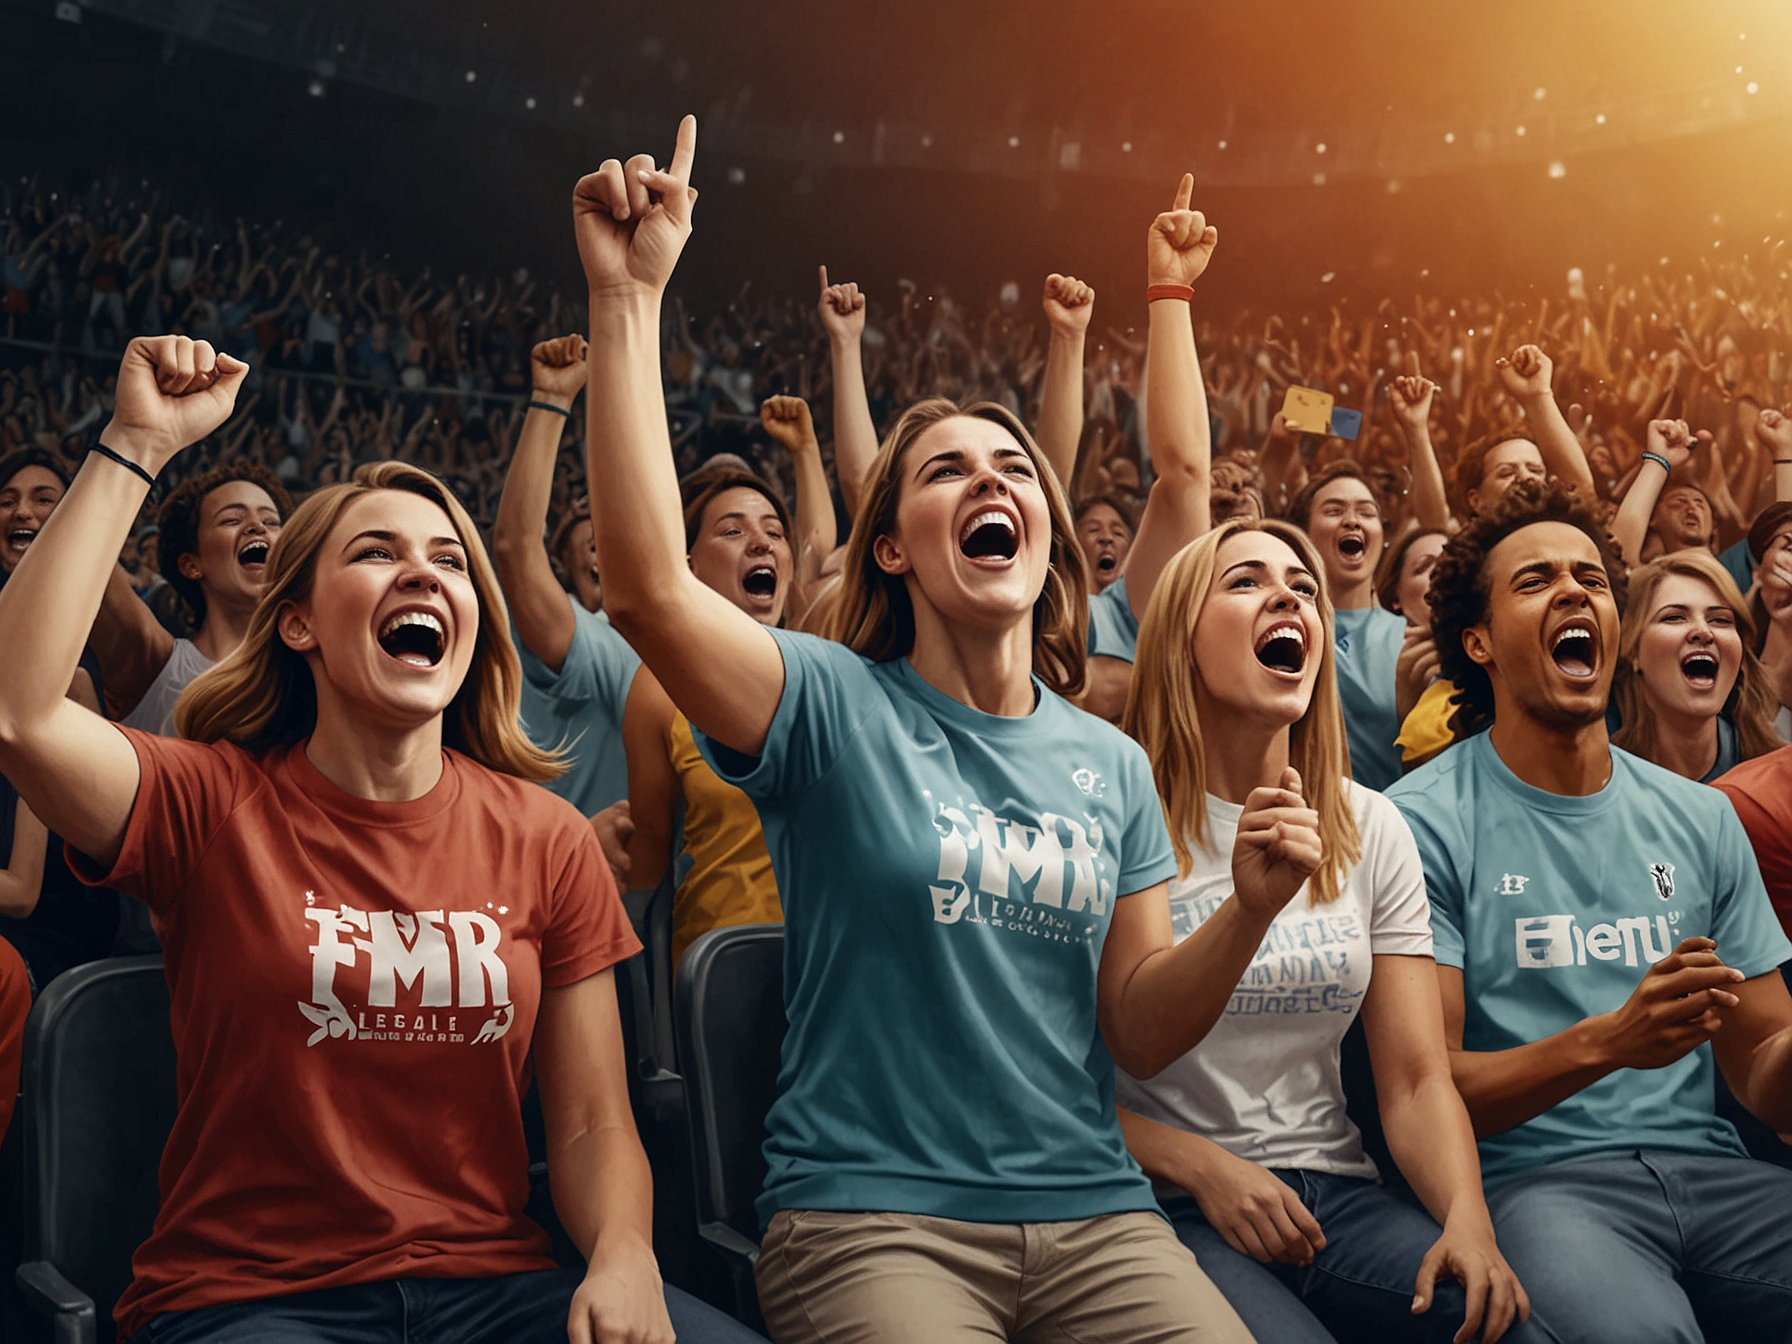 A group of fans passionately cheering for Caitlin Clark, illustrating both the positive and negative extremes of modern sports fandom fueled by social media platforms.